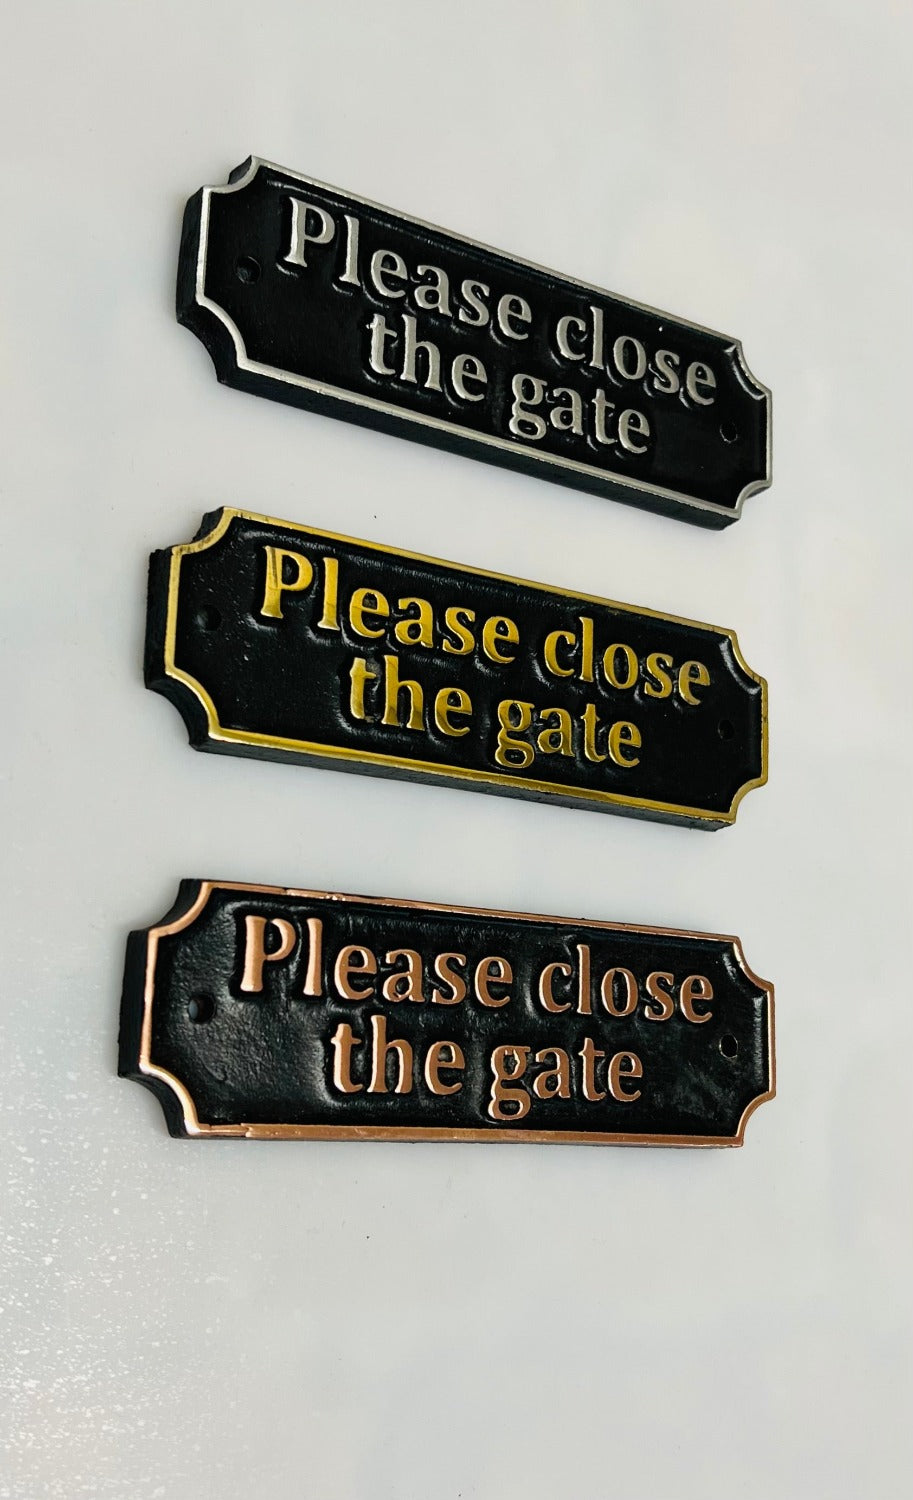 Garden Signs with Please close the gate